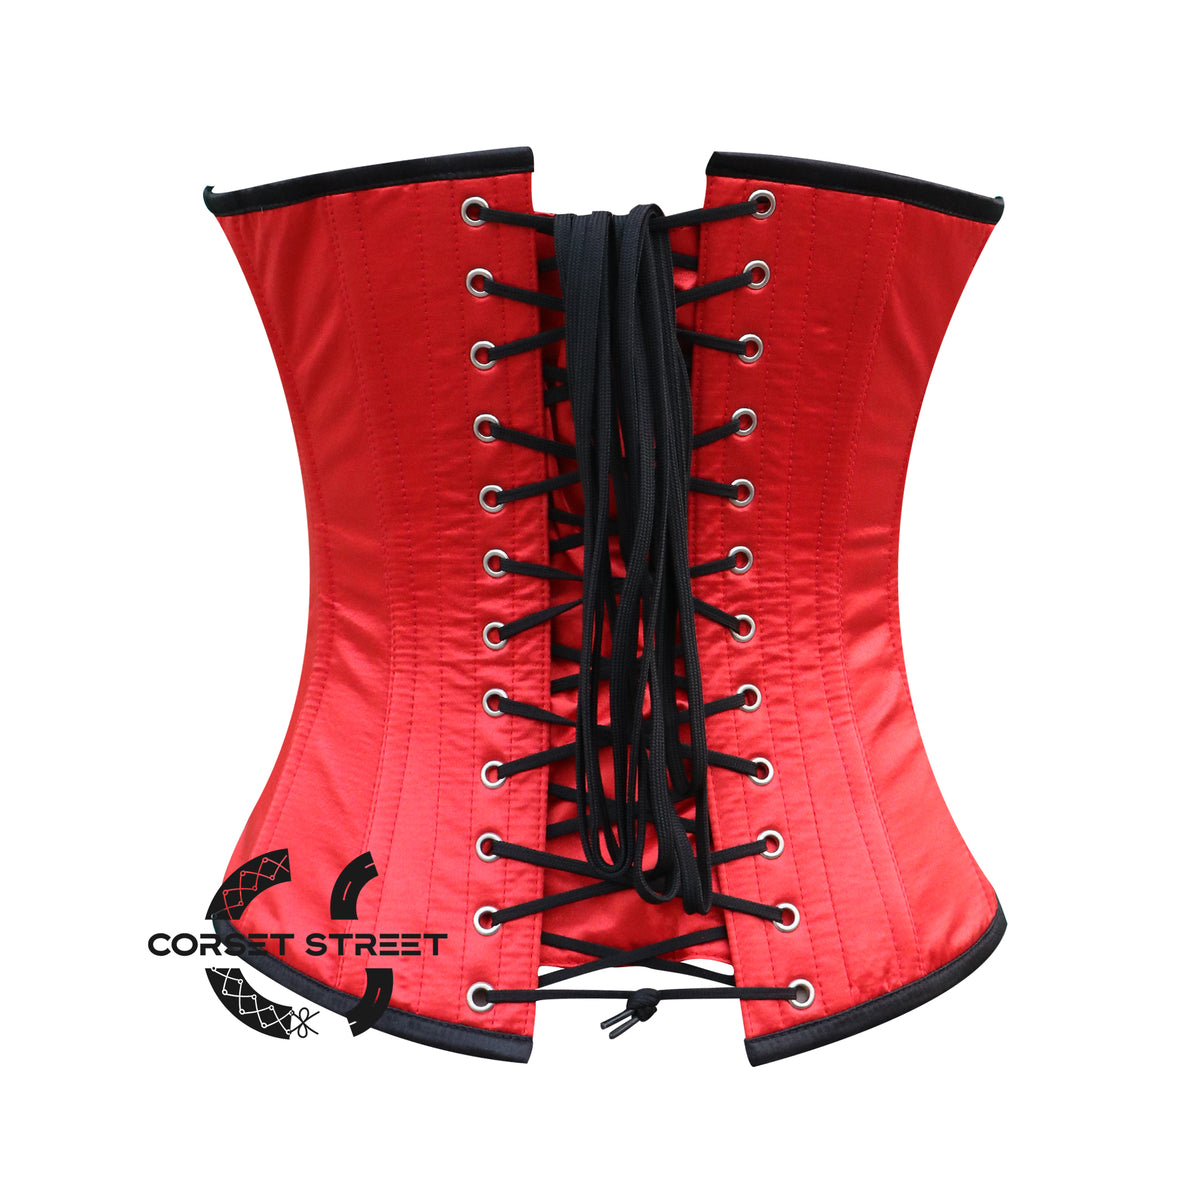 Red Satin Flowers And Sequins Hand Work Burlesque Gothic Plus Size Costume Overbust Bustier Top